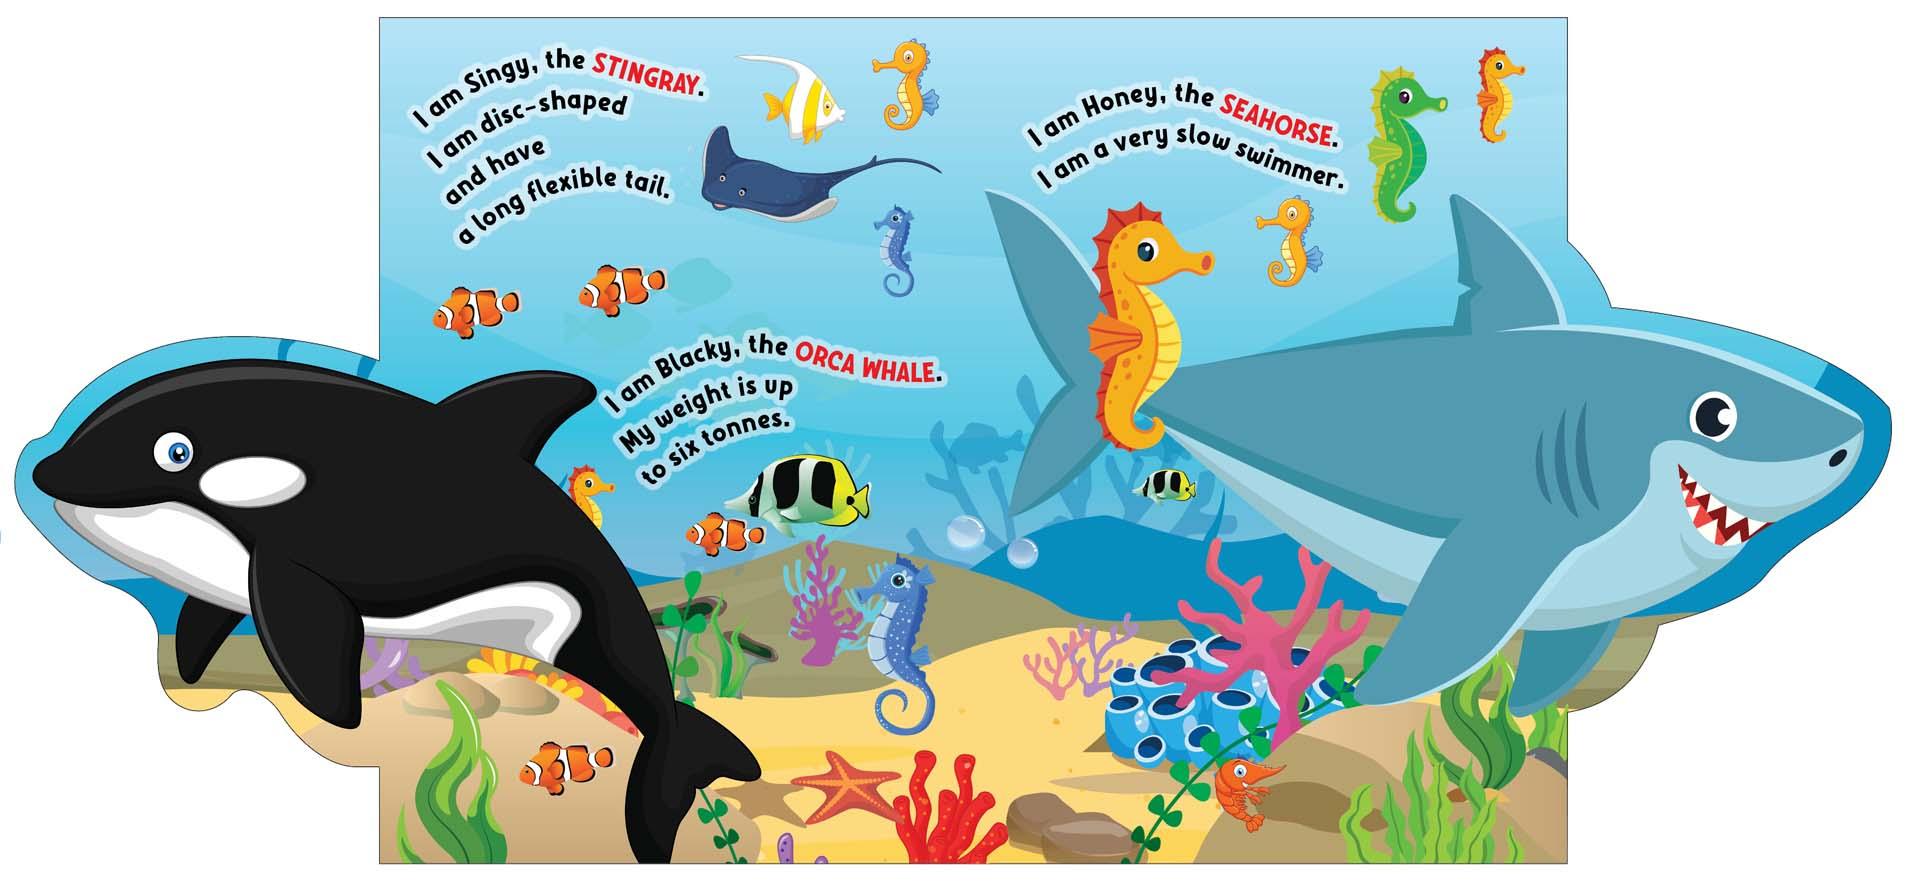 Dreamland Flap Book- Under the Ocean - An Interactive & Activity Book For Kids (English)